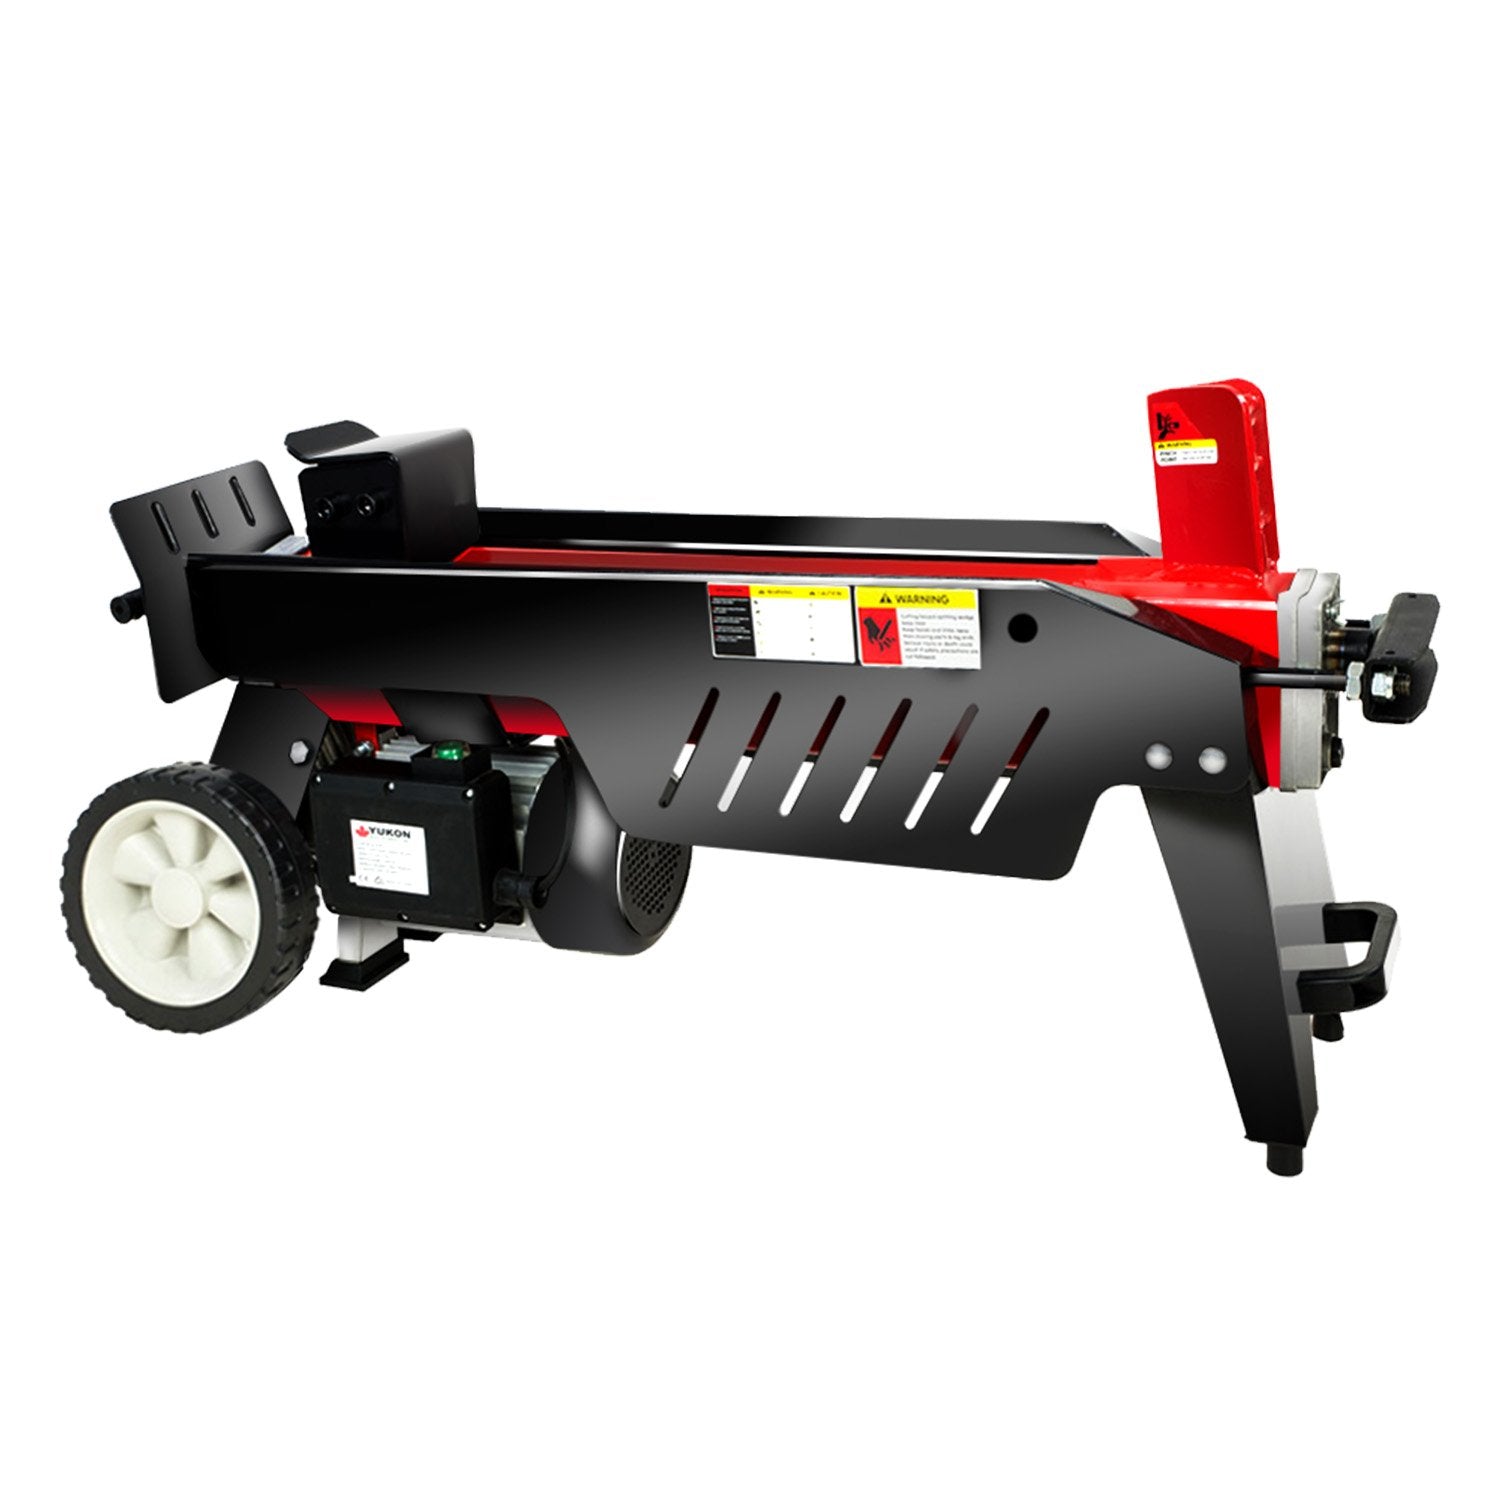 Yukon 7 Ton Electric Log Splitter With Side Protectors Axe Wood Cutter